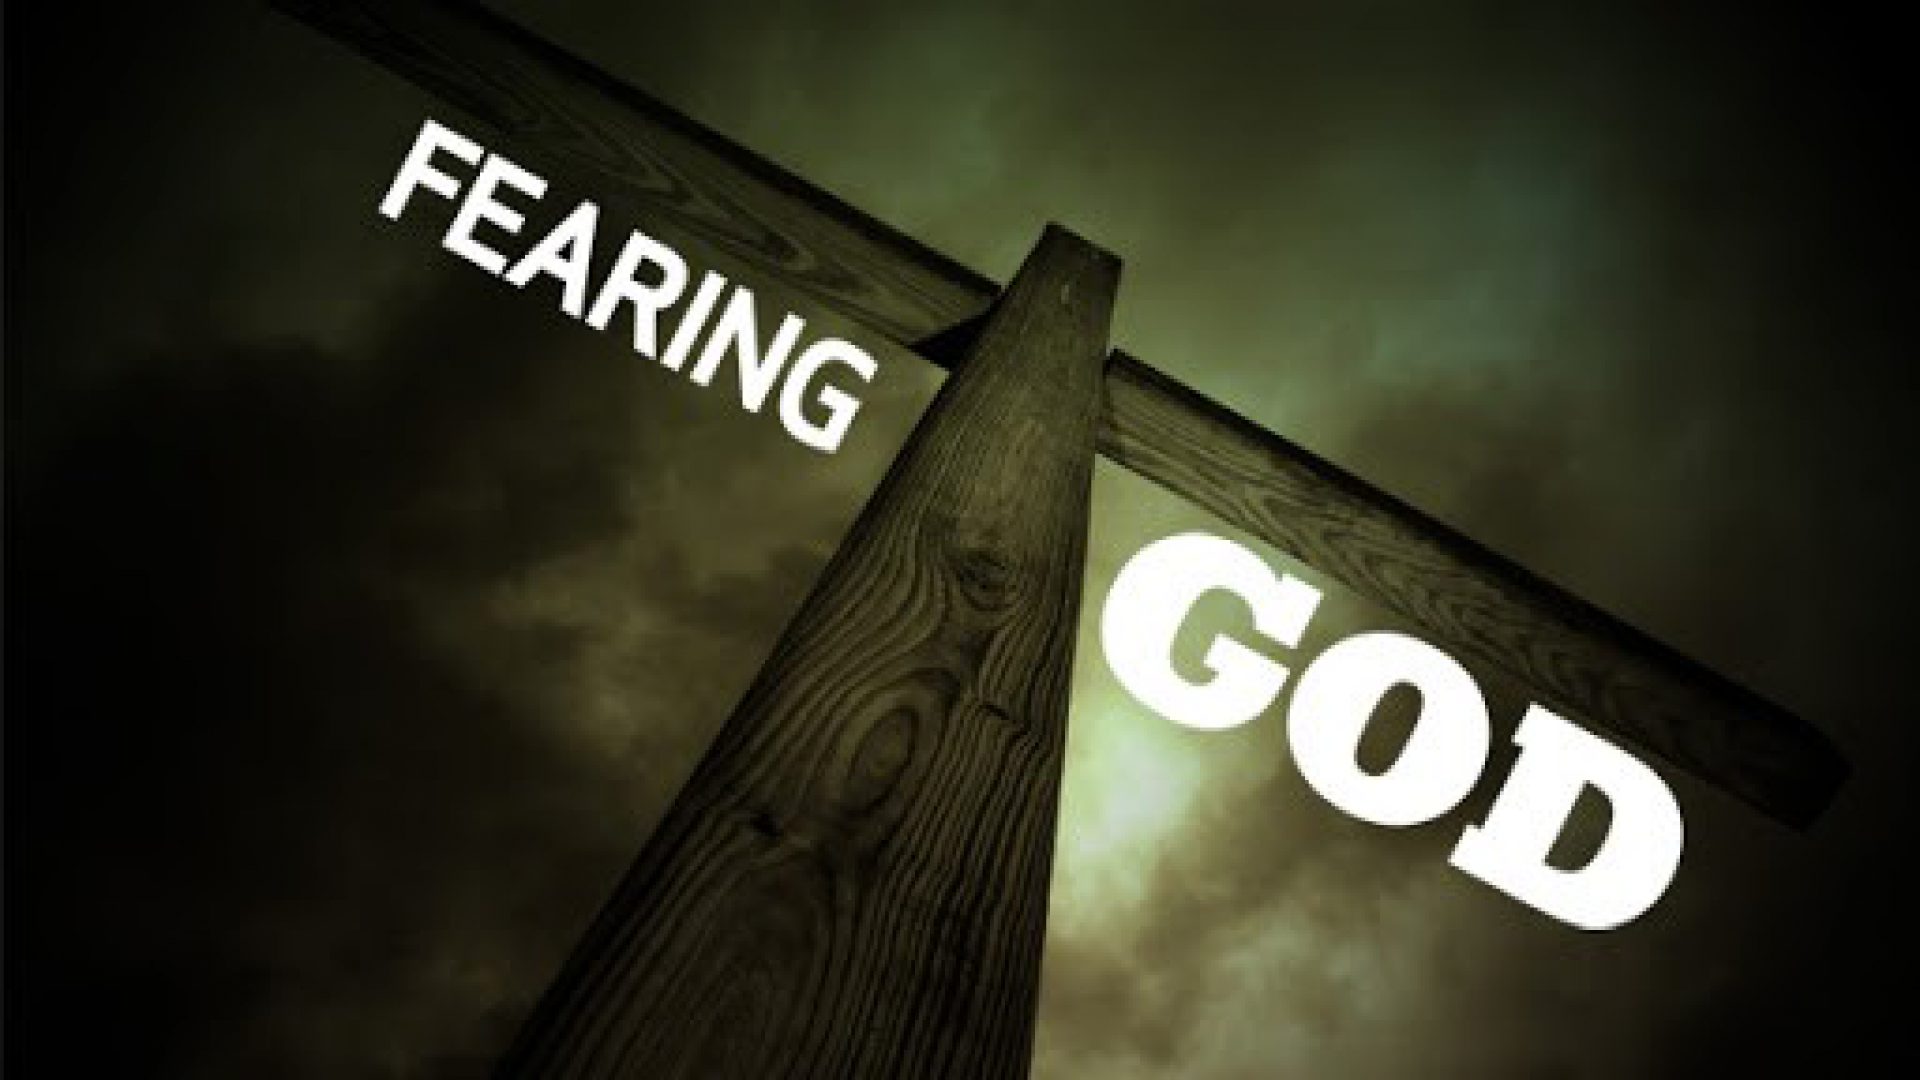 FEARING MAN OR FEARING GOD?